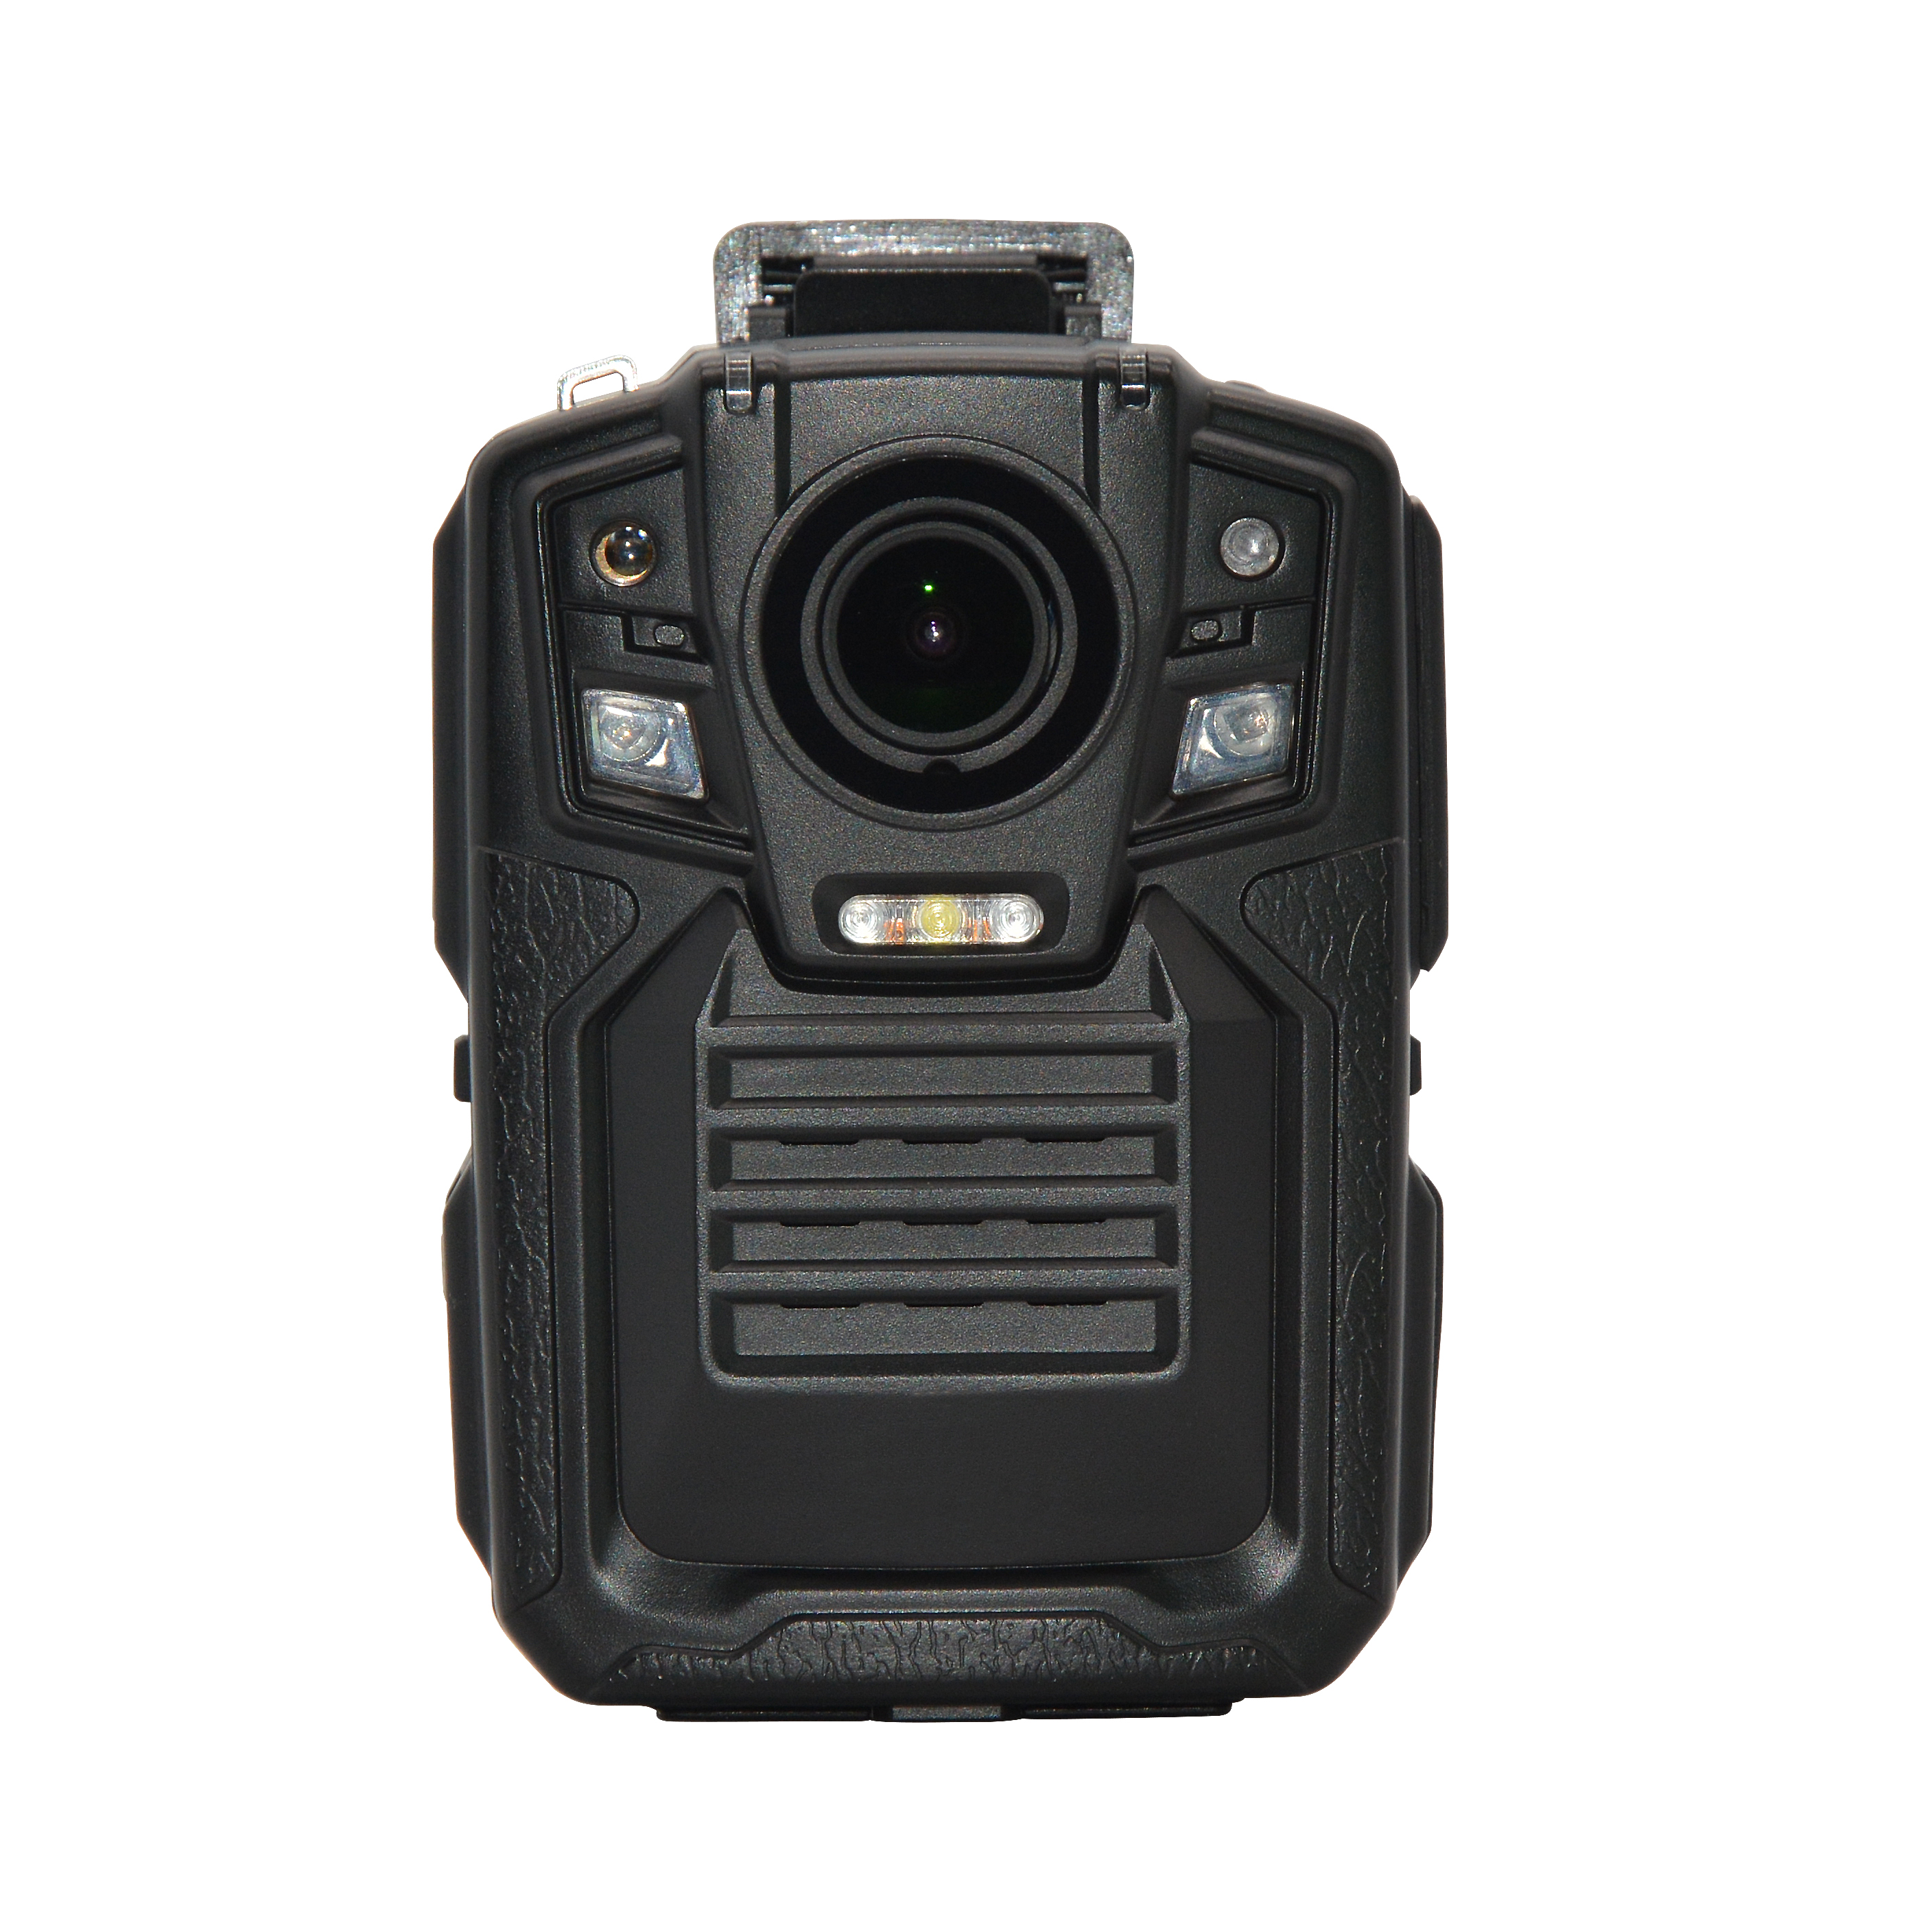 High Quality 1296P Portable Police Body Worn Camera with GPS 4G WIFI